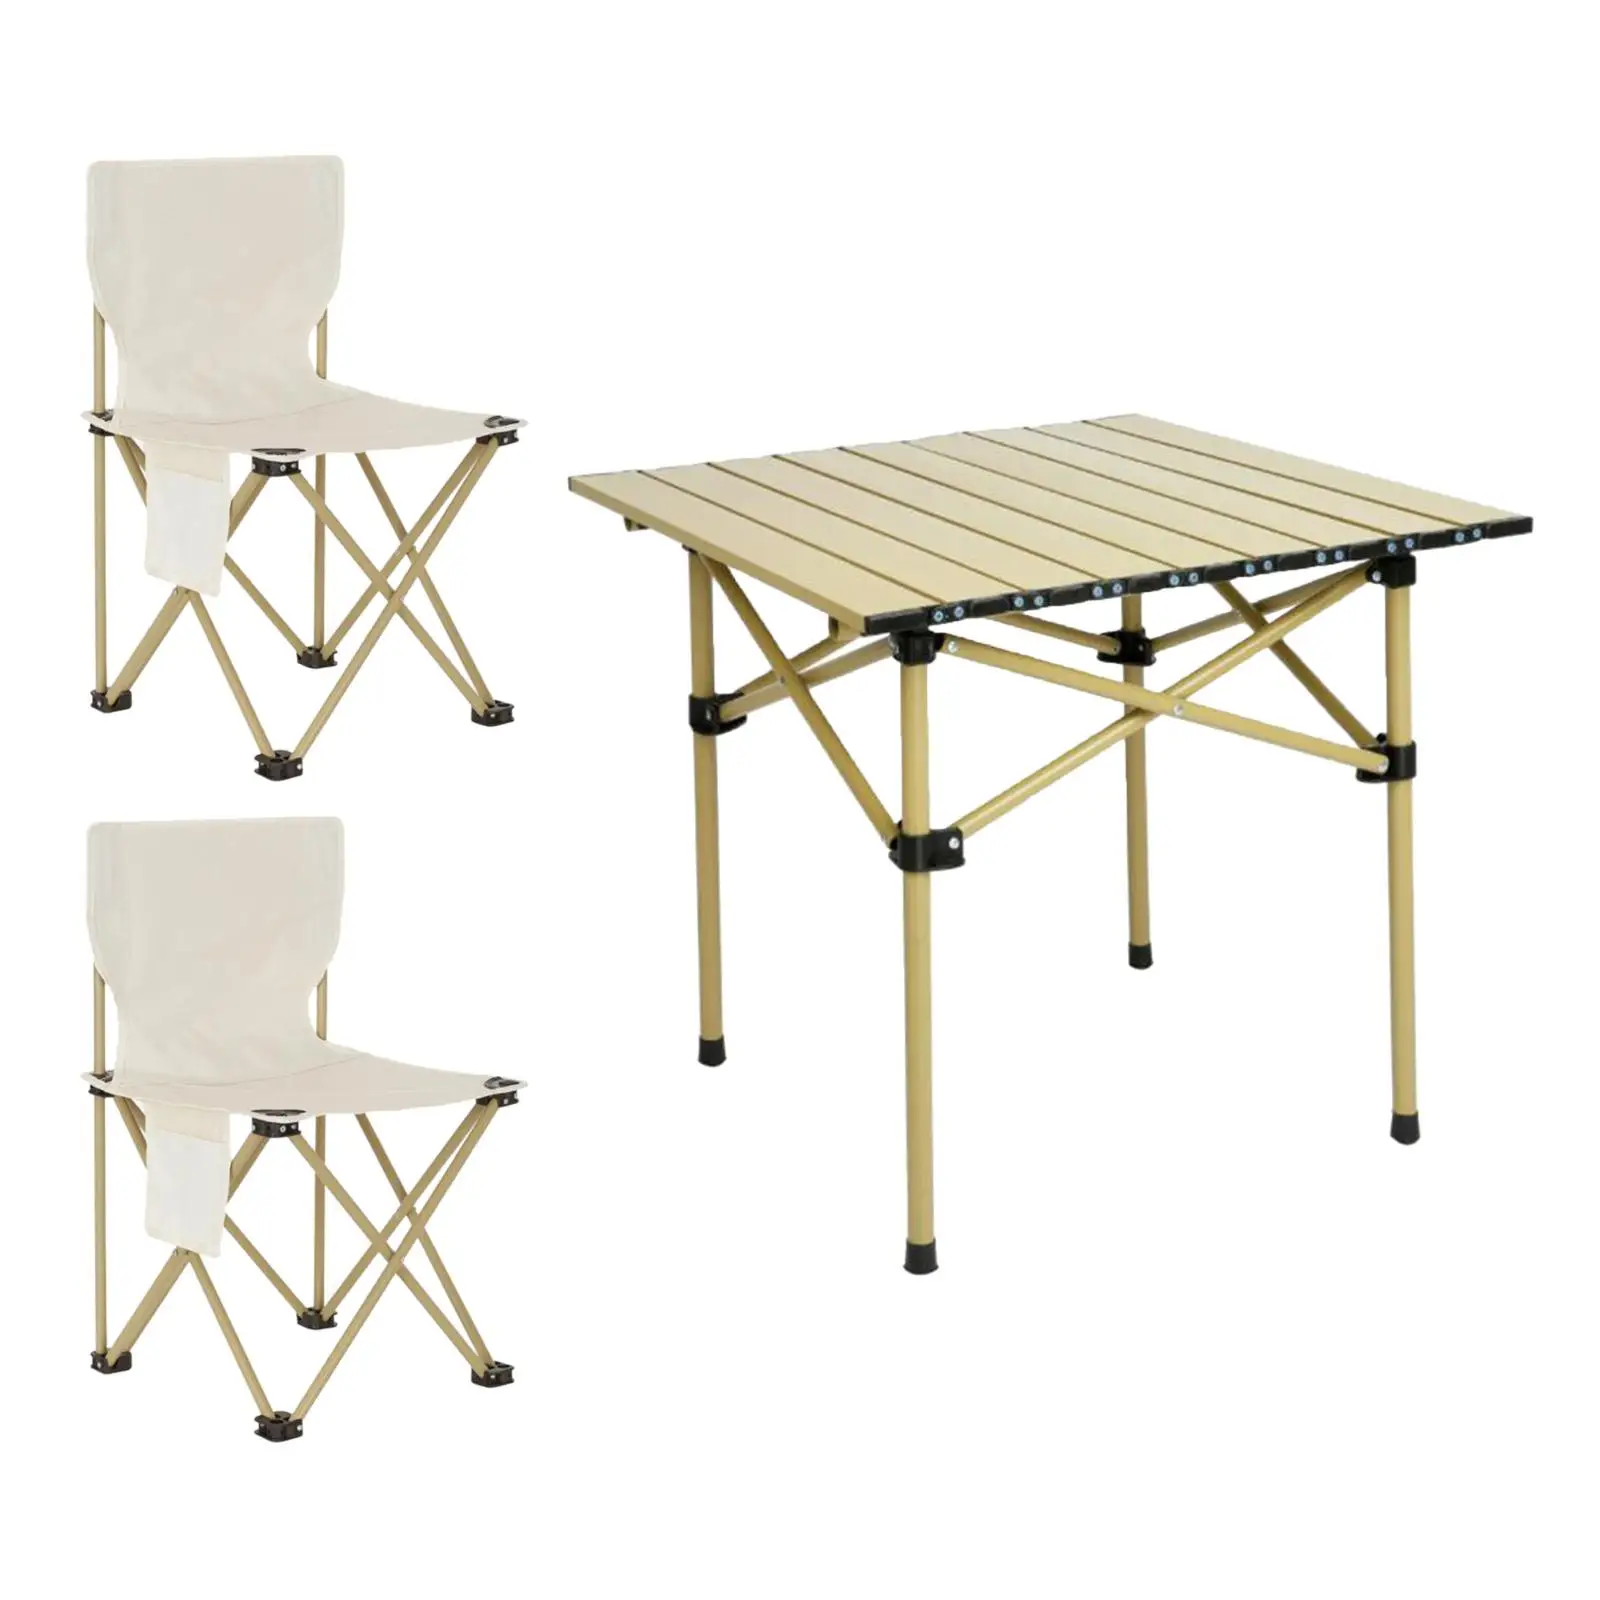 Camping Folding Table Chairs Set Oxford Mat Chair Camp Table Beach Table Coffee Tables Side Table for Outdoor Backyard Party